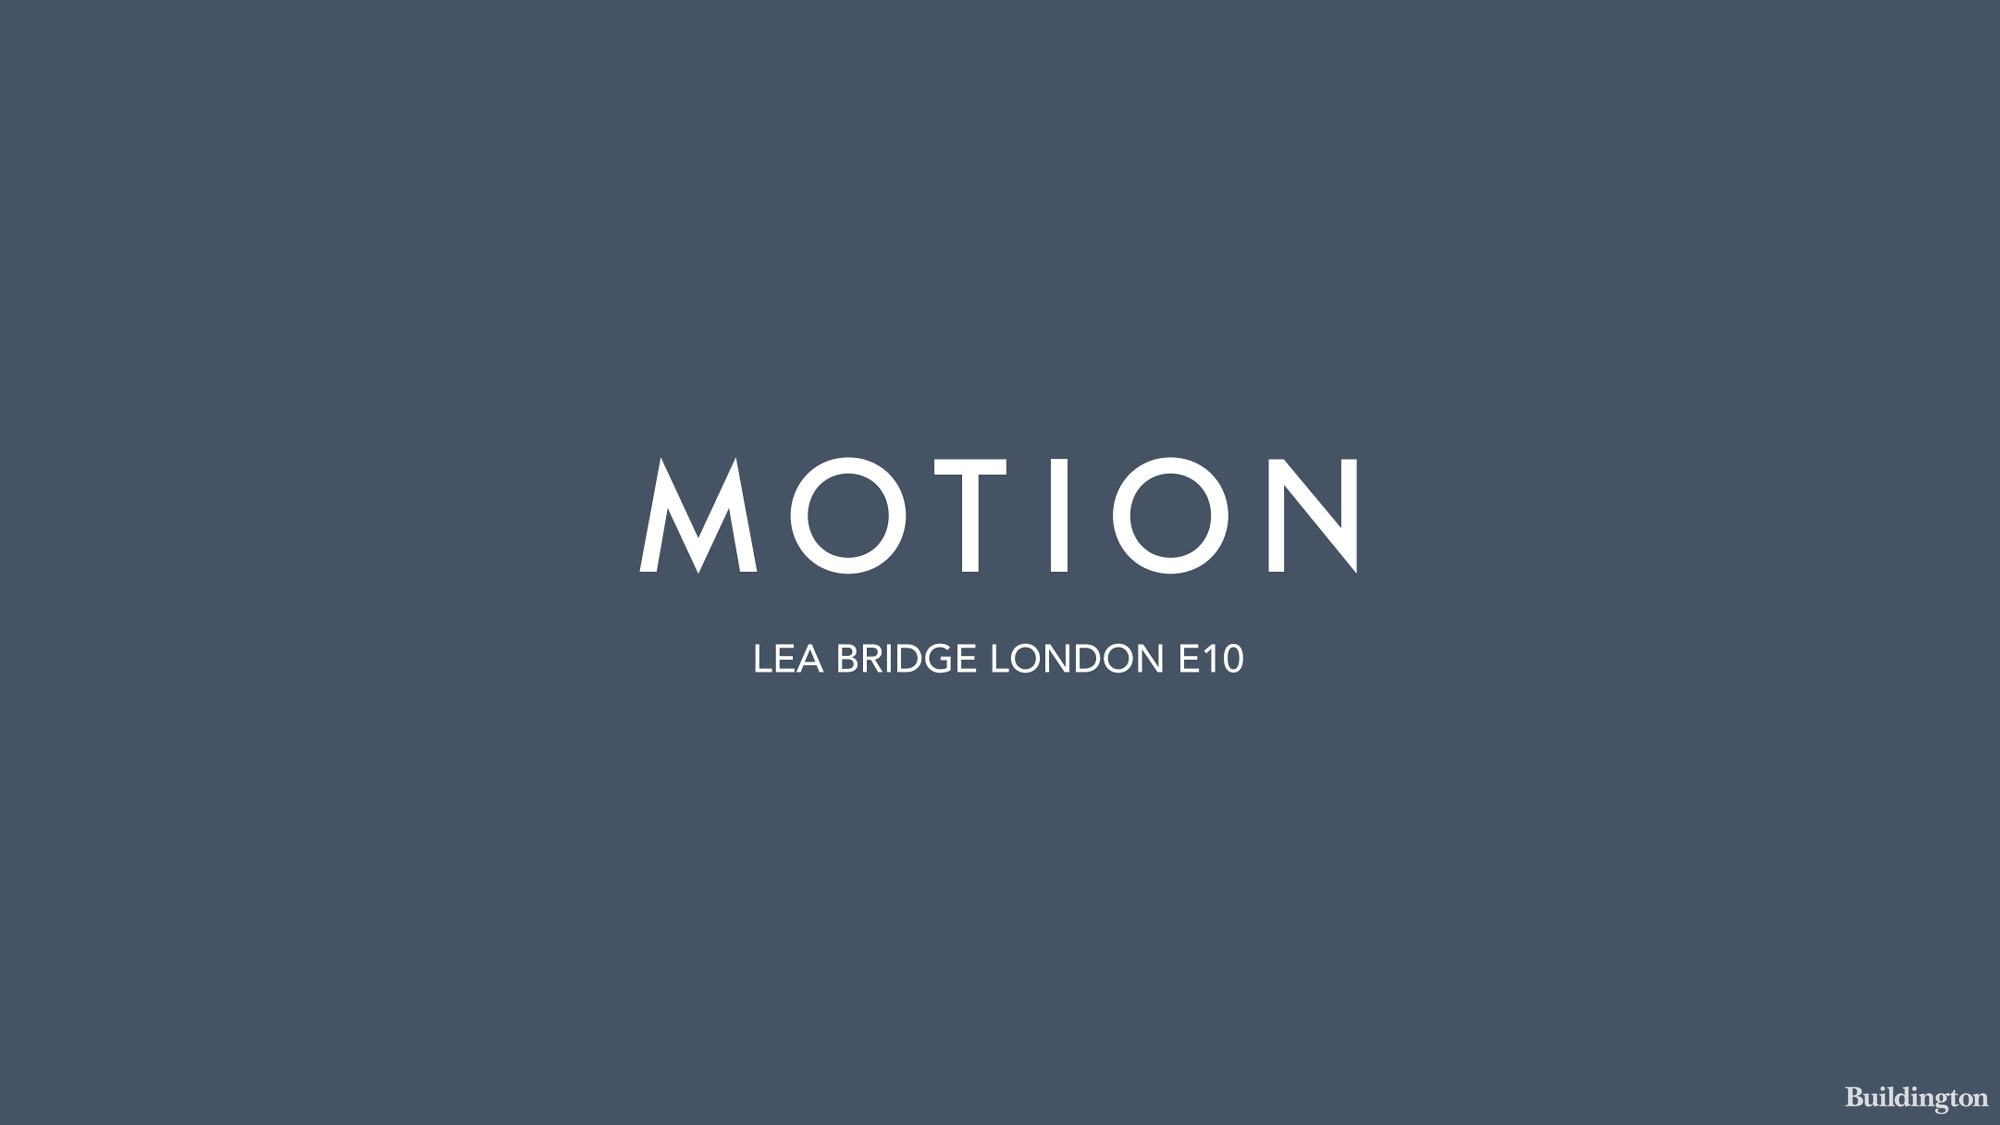 Motion by Peabody